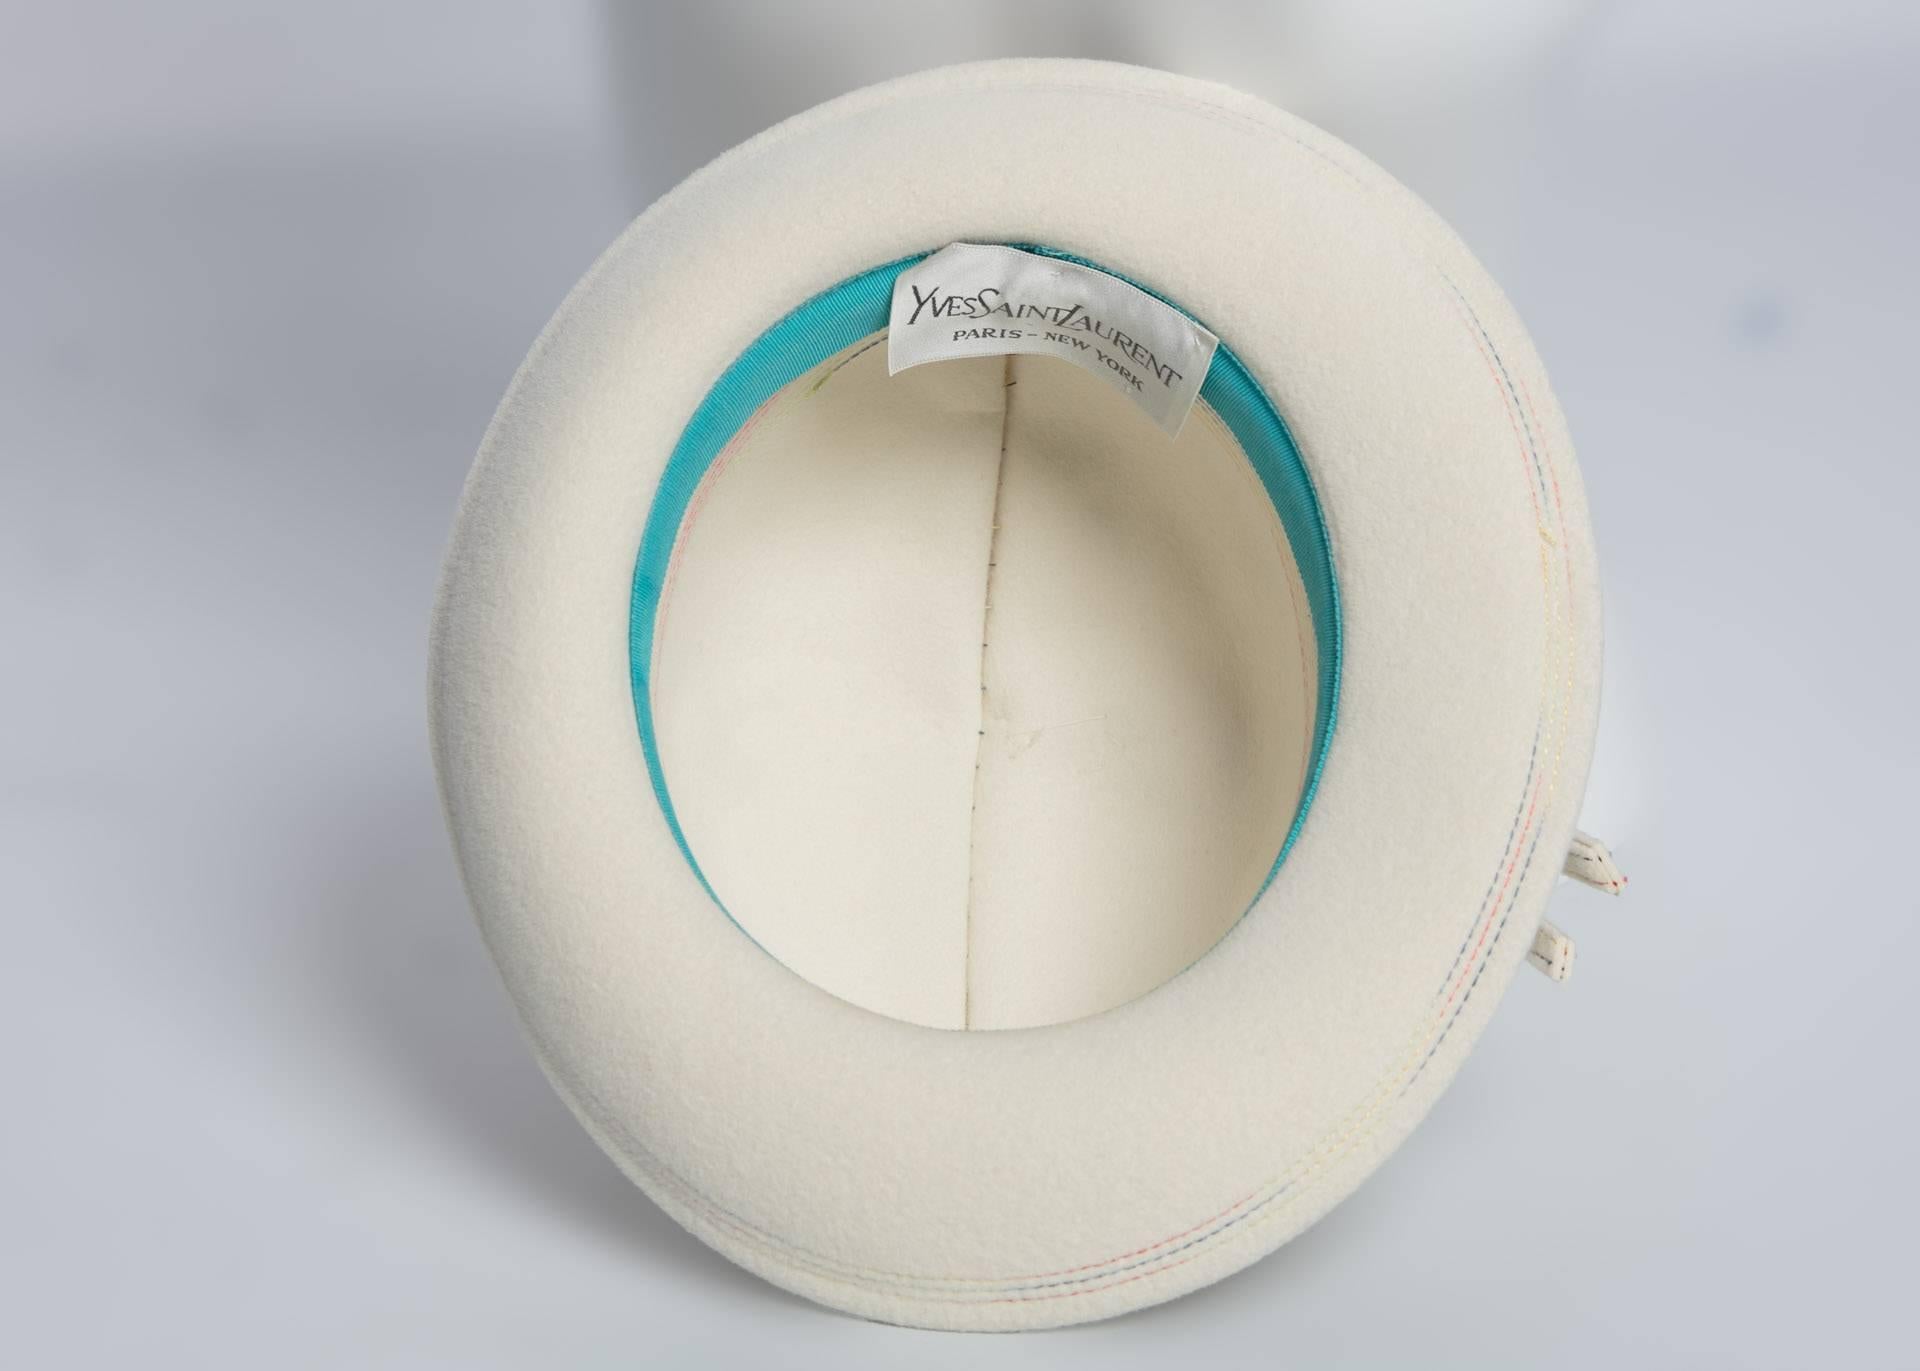 1960s Yves Saint Laurent YSL Sculpted Ivory Felt Fedora Hat In Excellent Condition For Sale In Boca Raton, FL